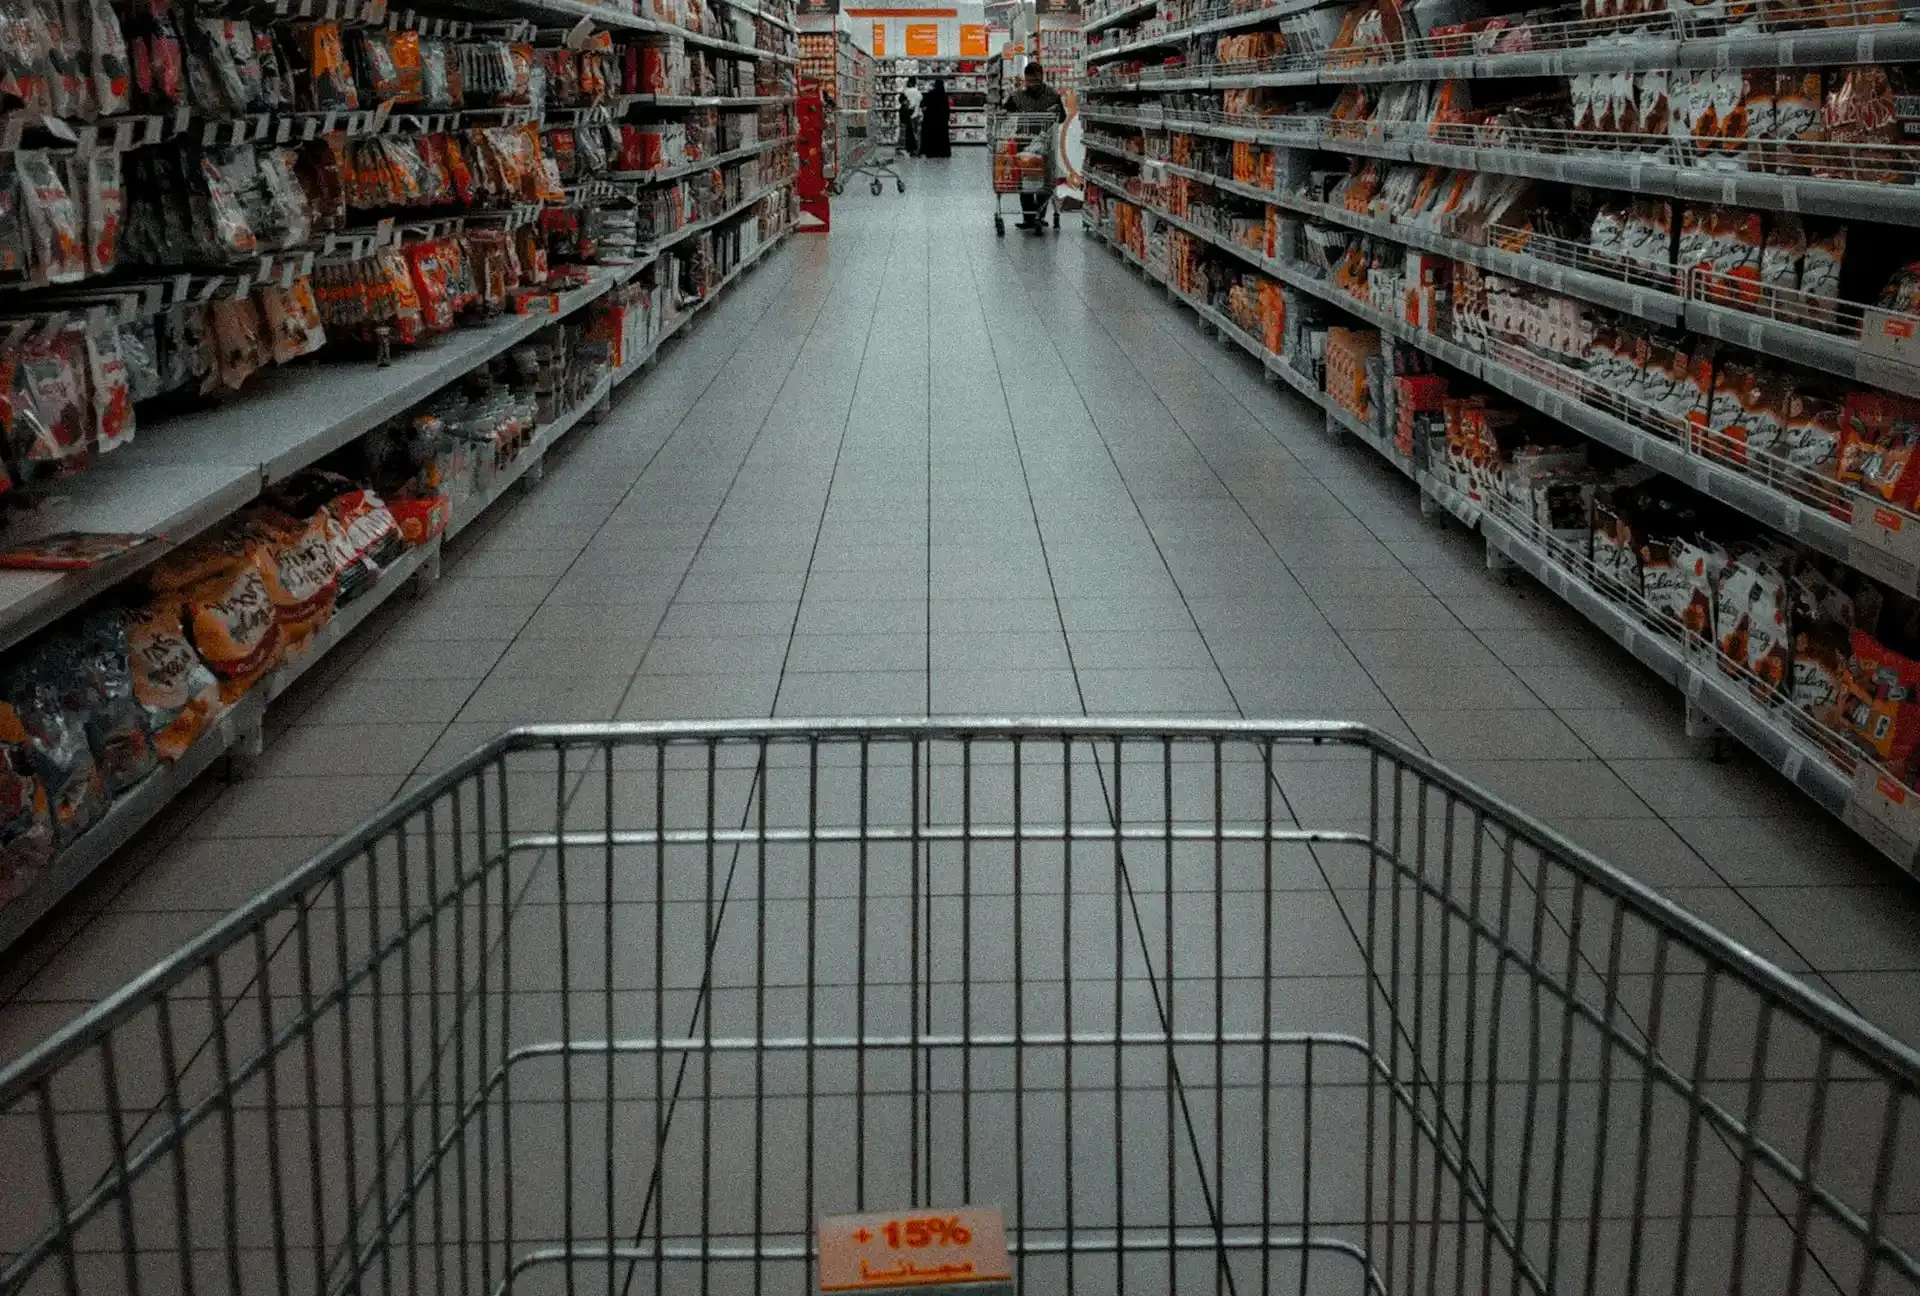 Consumer Currents – Food For Thought: Do Grocers Need To Reinvent Their Business Model?